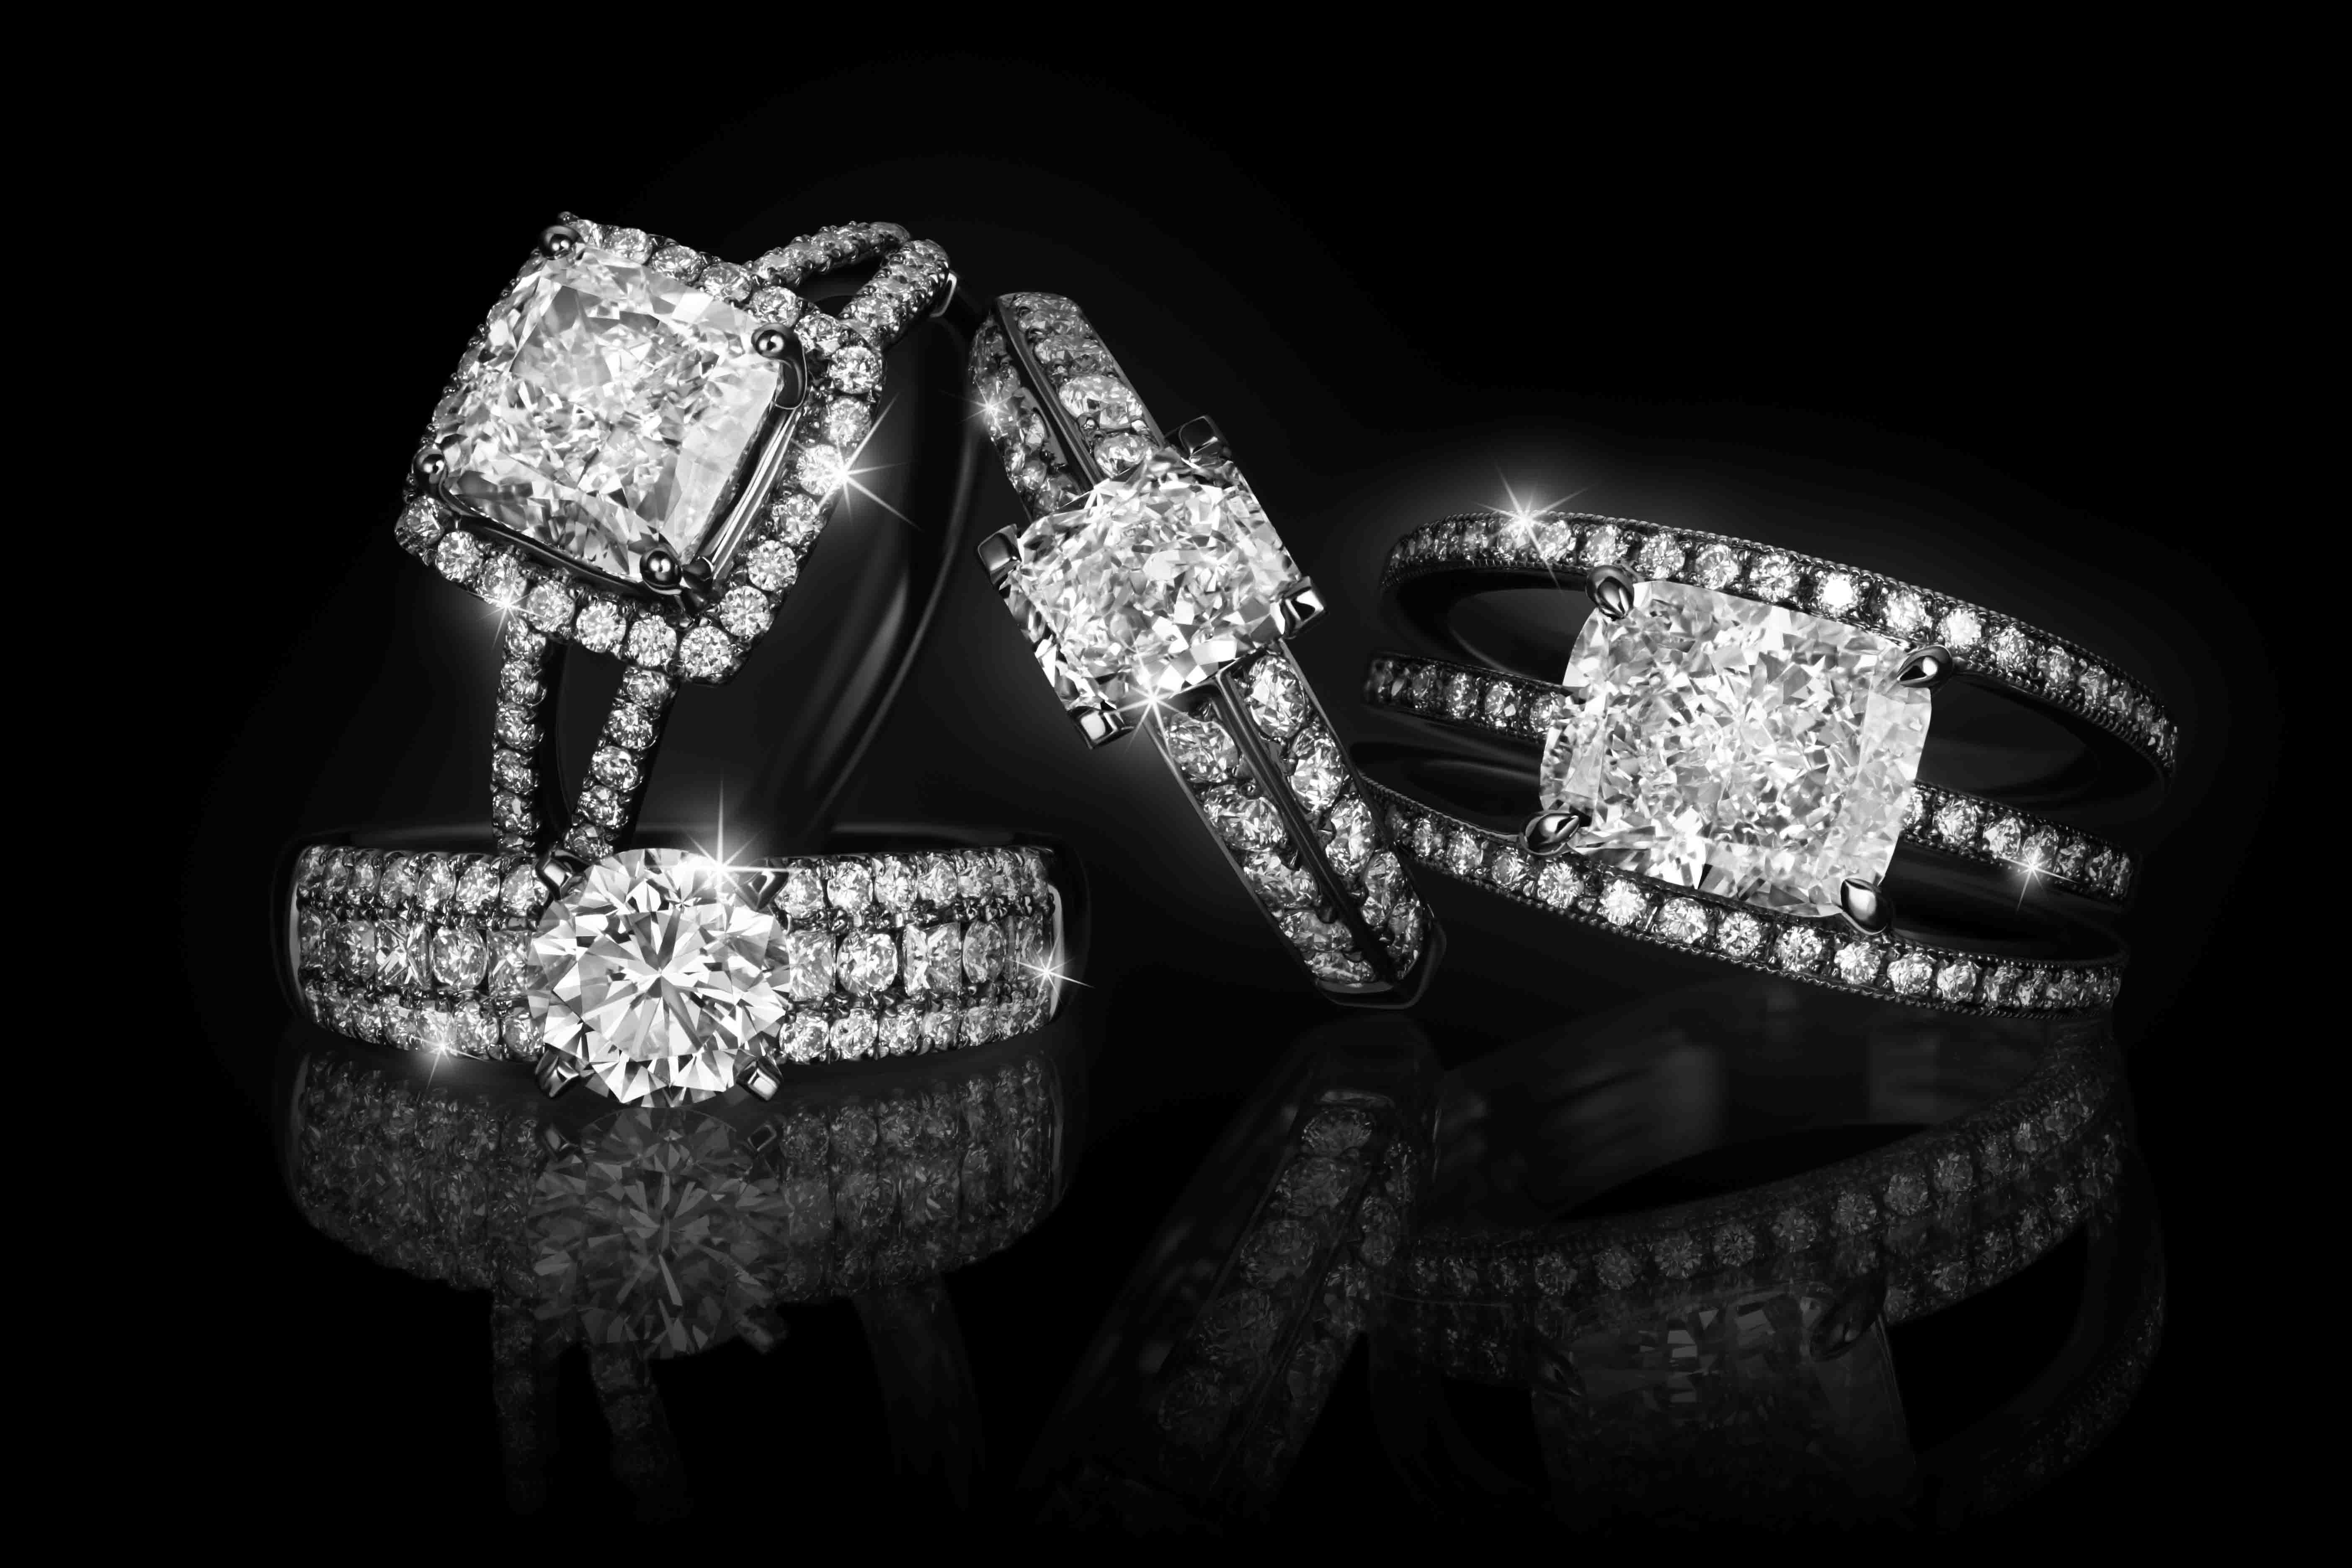 Contemporary Settings For Your Diamond Rings